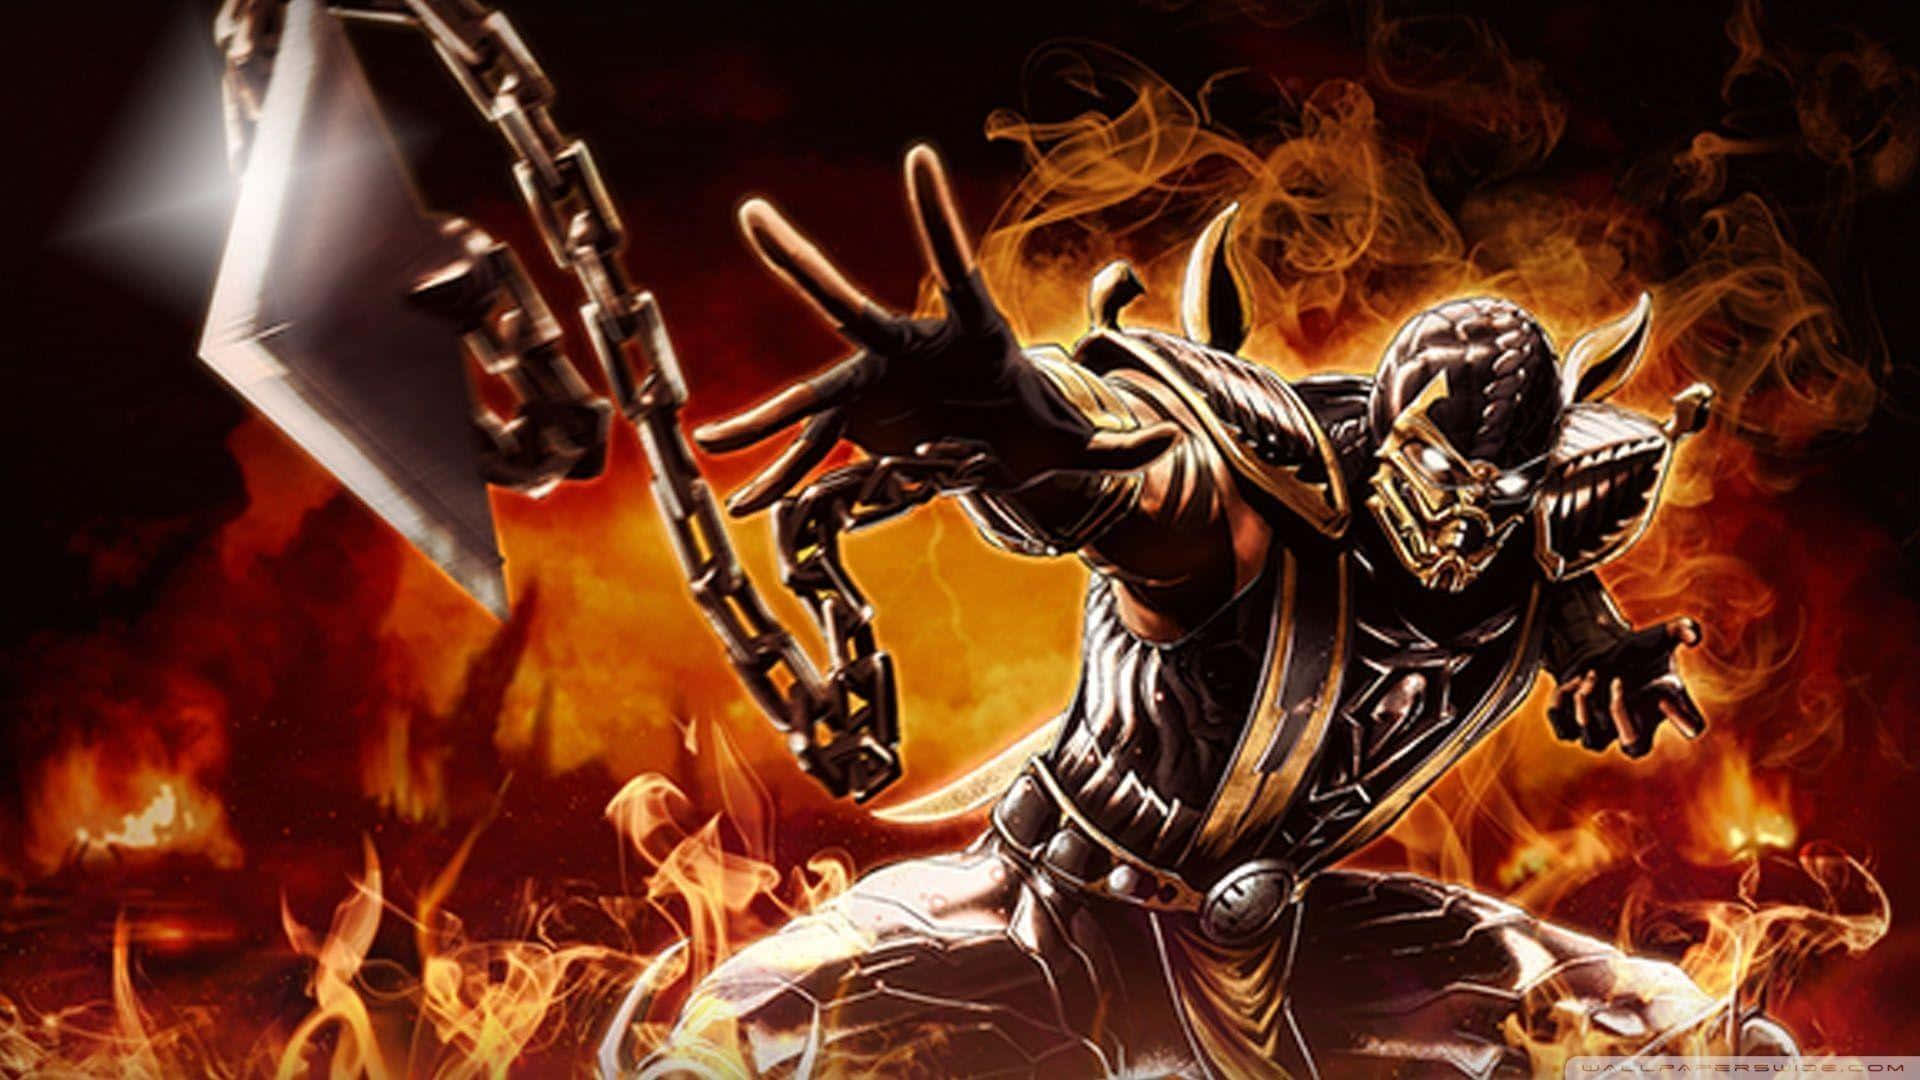 Mortal Kombat's Fearsome Triborg Unleashed Wallpaper